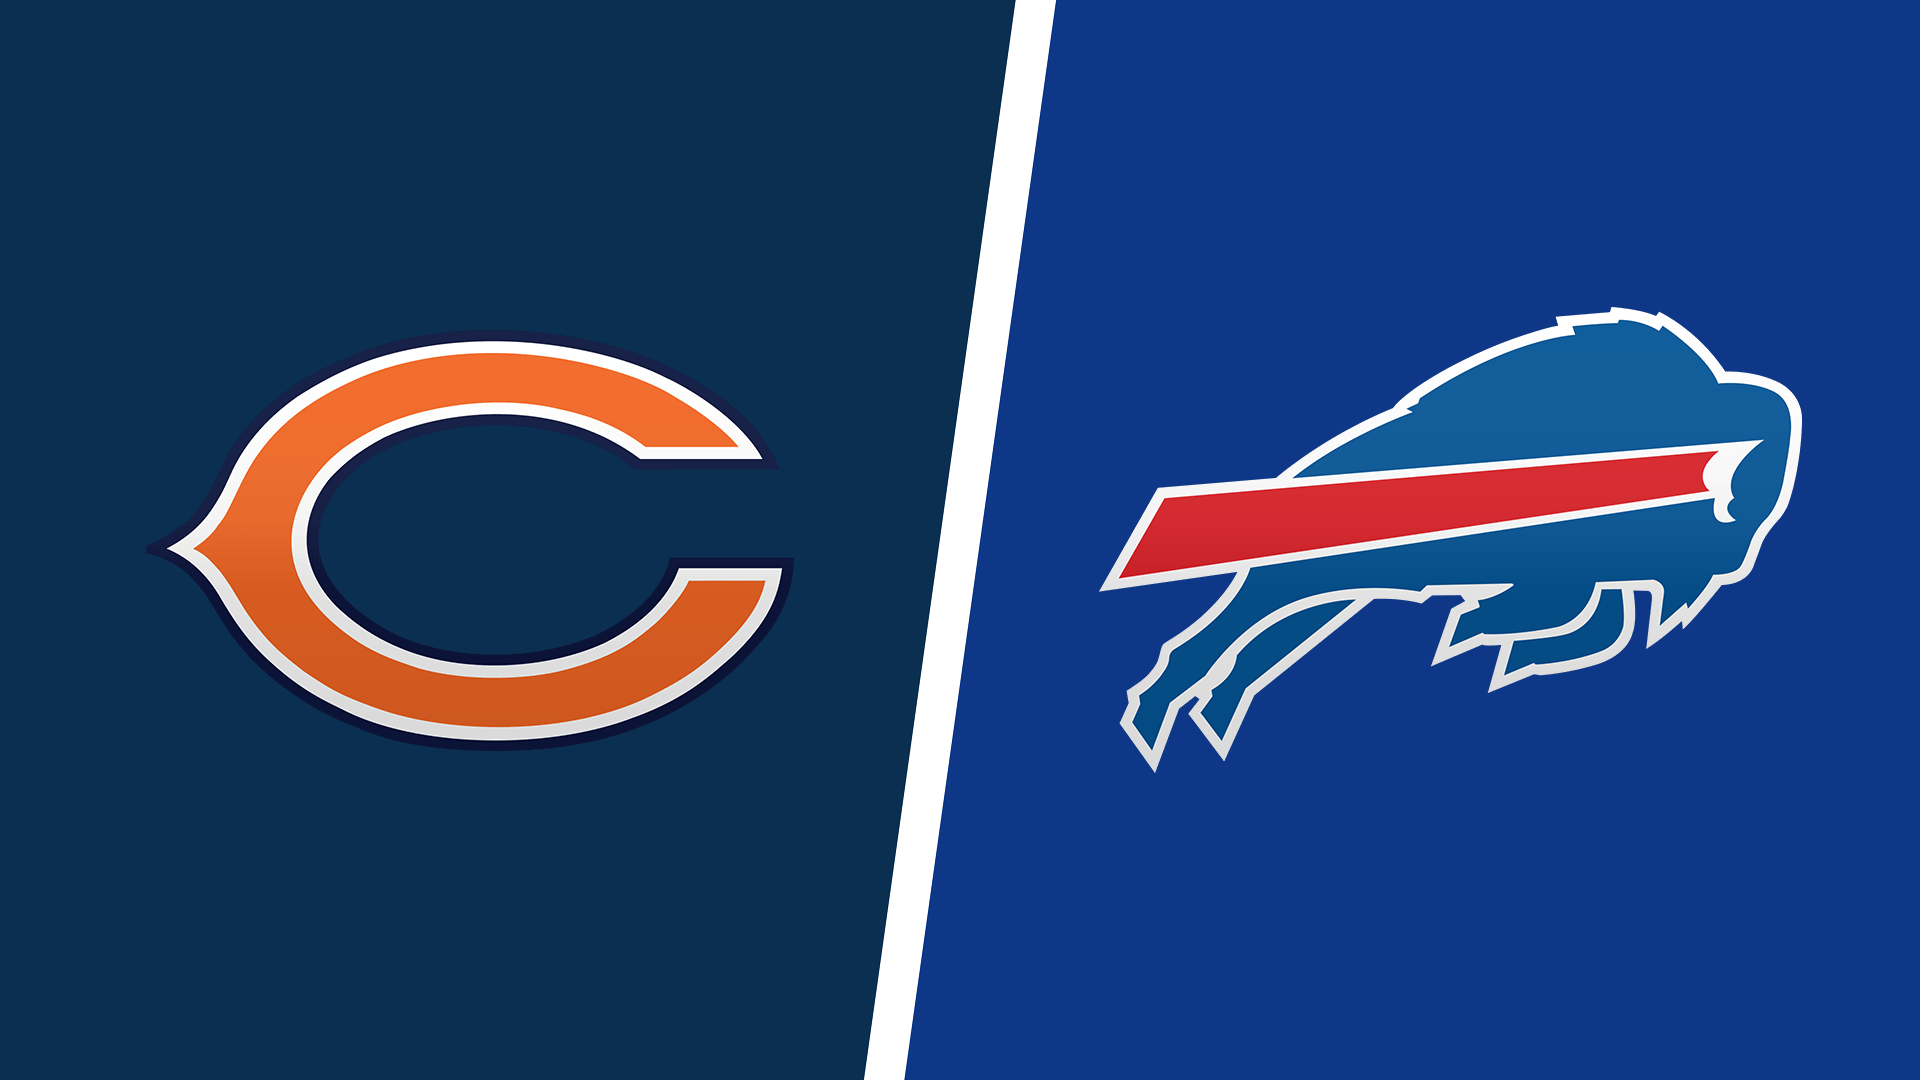 How to Buffalo Bills vs. Chicago Bears Week 2 NFL Preseason Game Live Online Streaming on August 21, 2021: TV – The